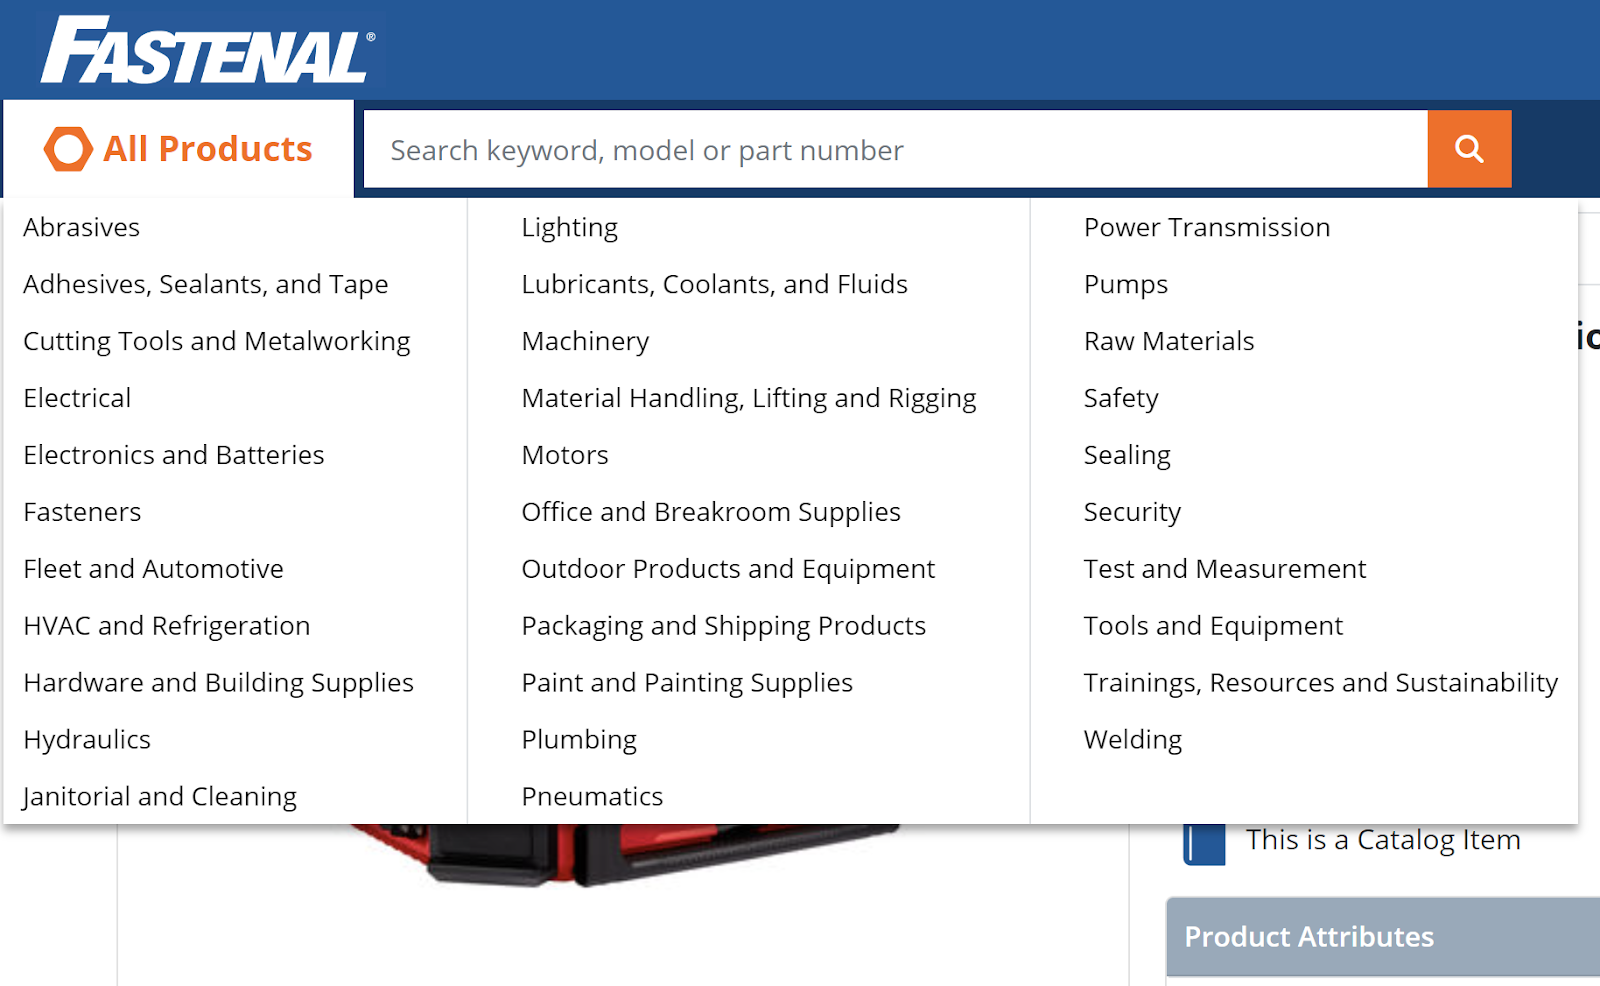 All products drop-down menu on Fastenal's website